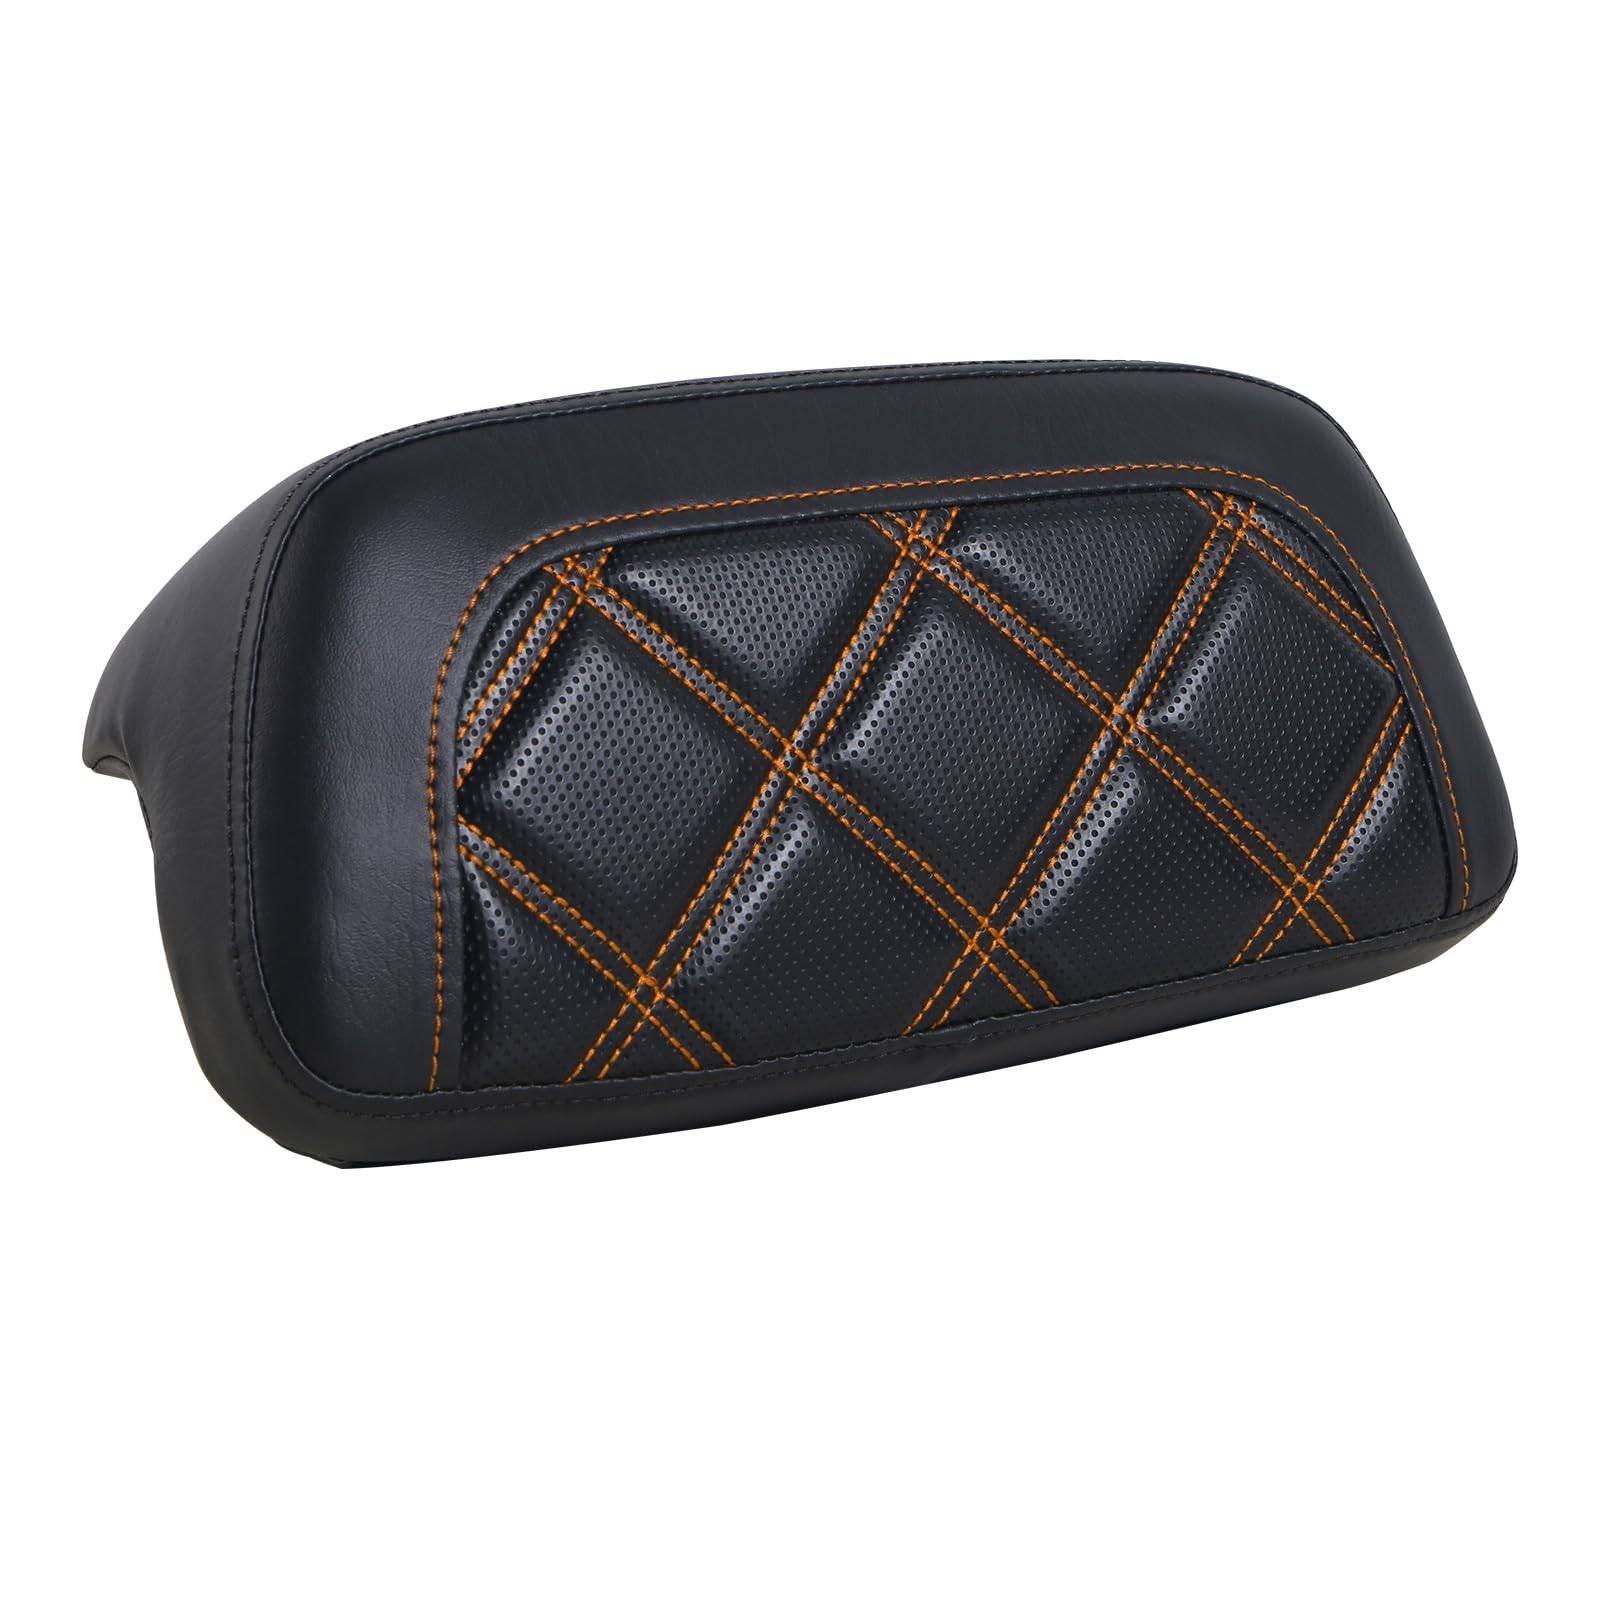 Stitching backrest cushion pad for Harley Davidson Glide Road King Touring1